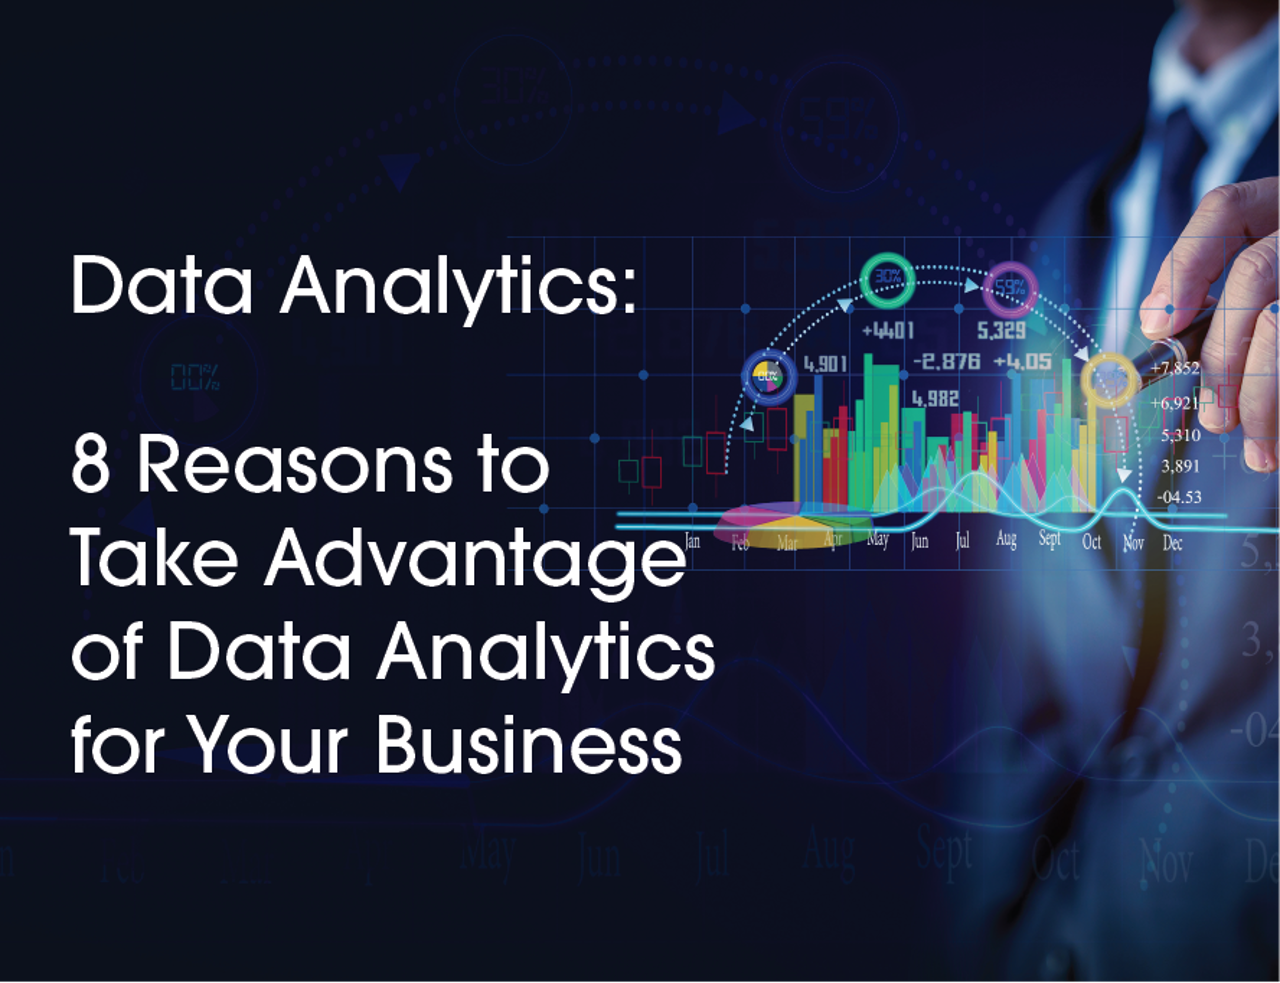 8 Reasons to Take Advantage of Data Analytics for Your Business